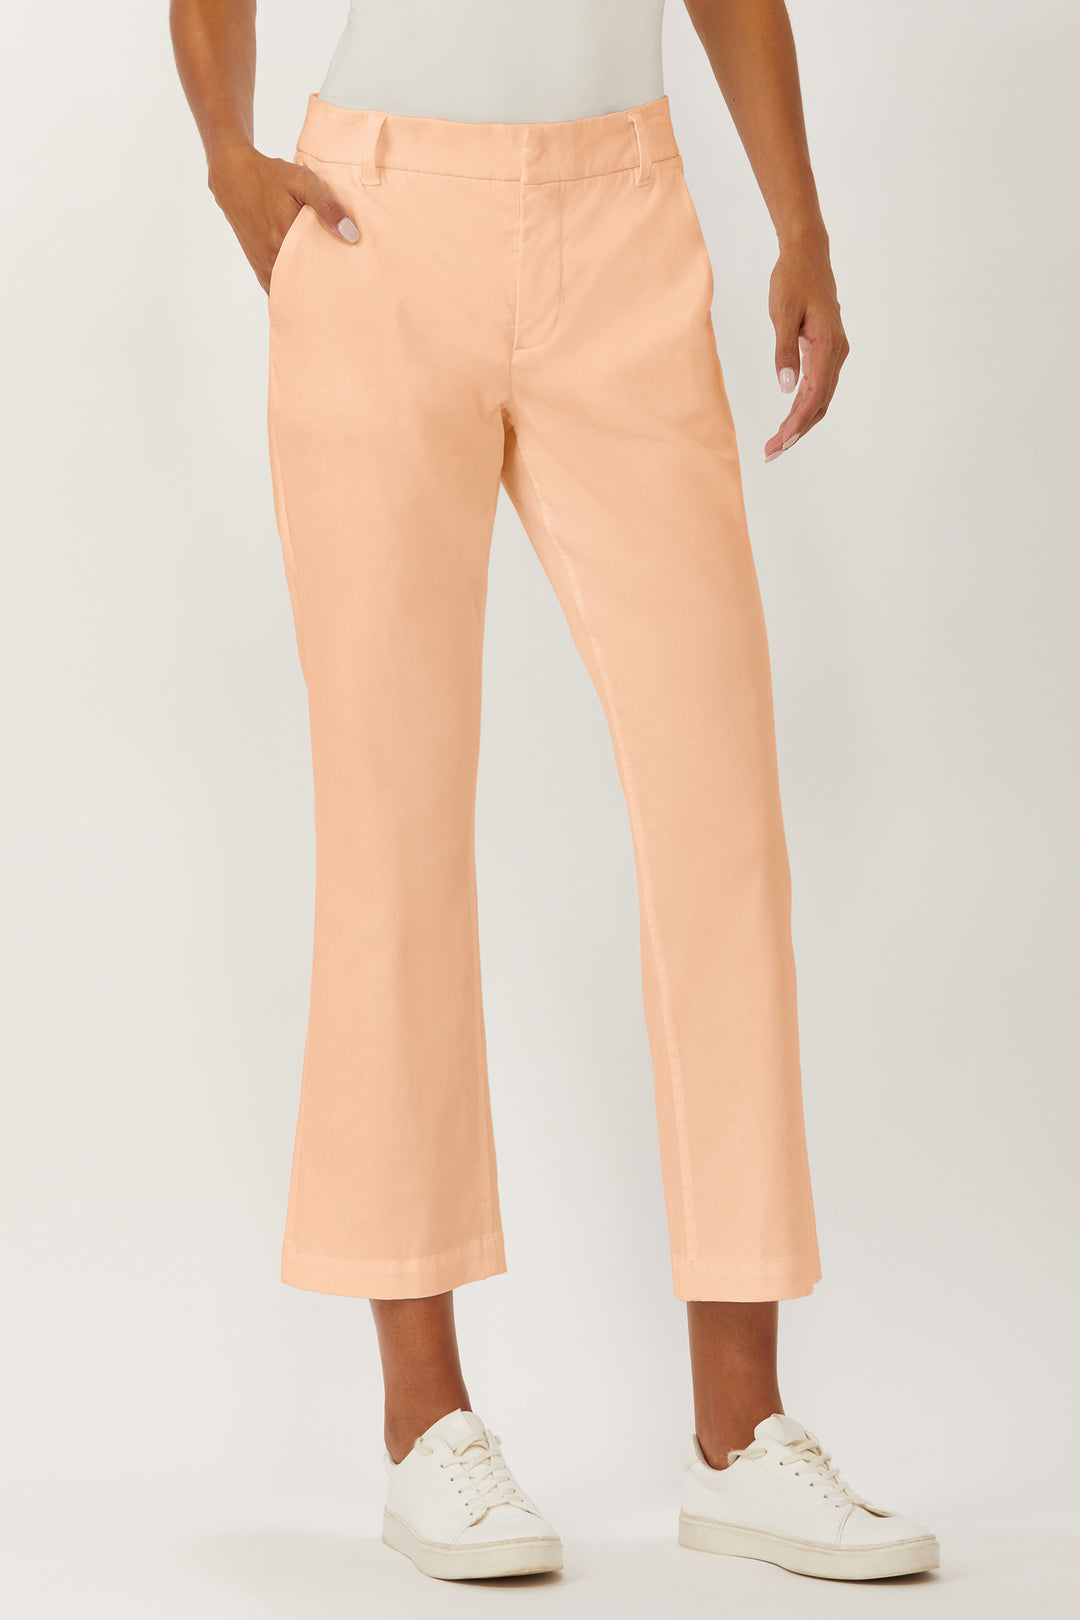 Stills Cropped Flare Pant - Apricot